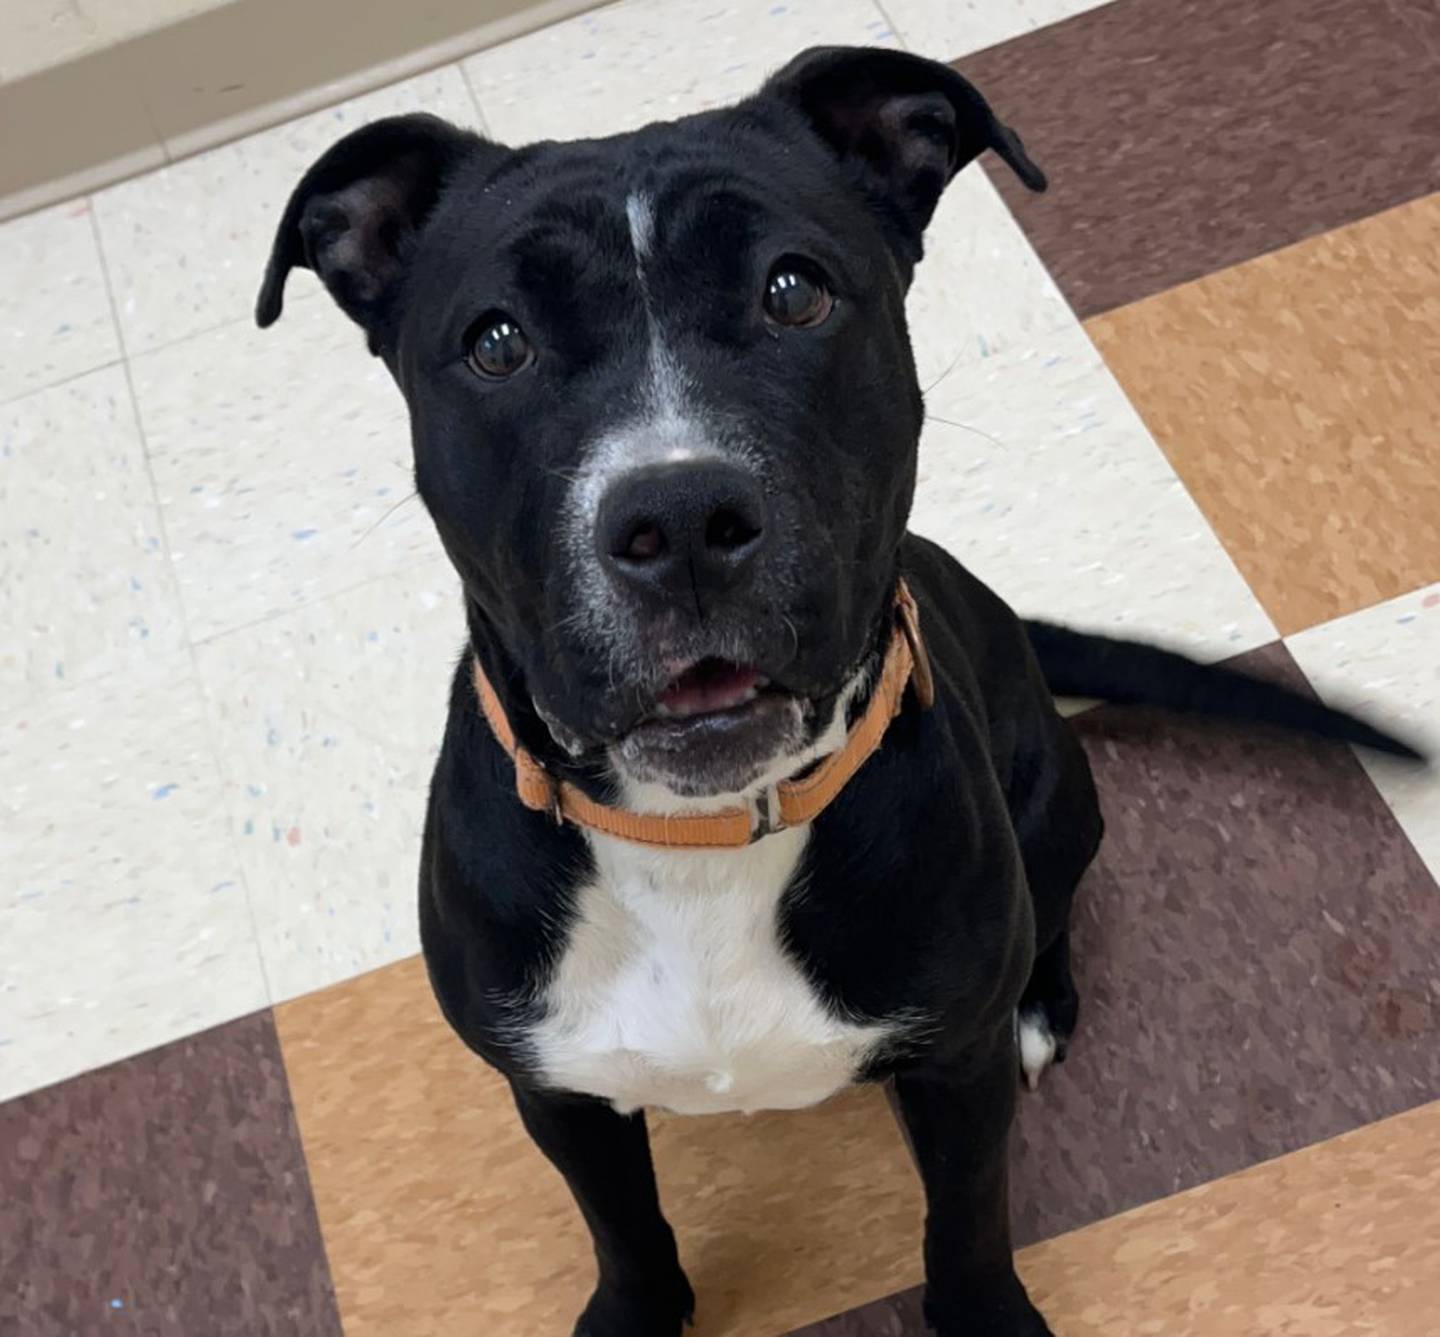 Mariah is a 9-month-old pittie. She does well with other dogs and will share her toys as long as they want to play, play, play. Mariah will bring joy, laughter, and pittie snuggles to any home. To meet Mariah, call Joliet Township Animal Control at 815-725-0333.